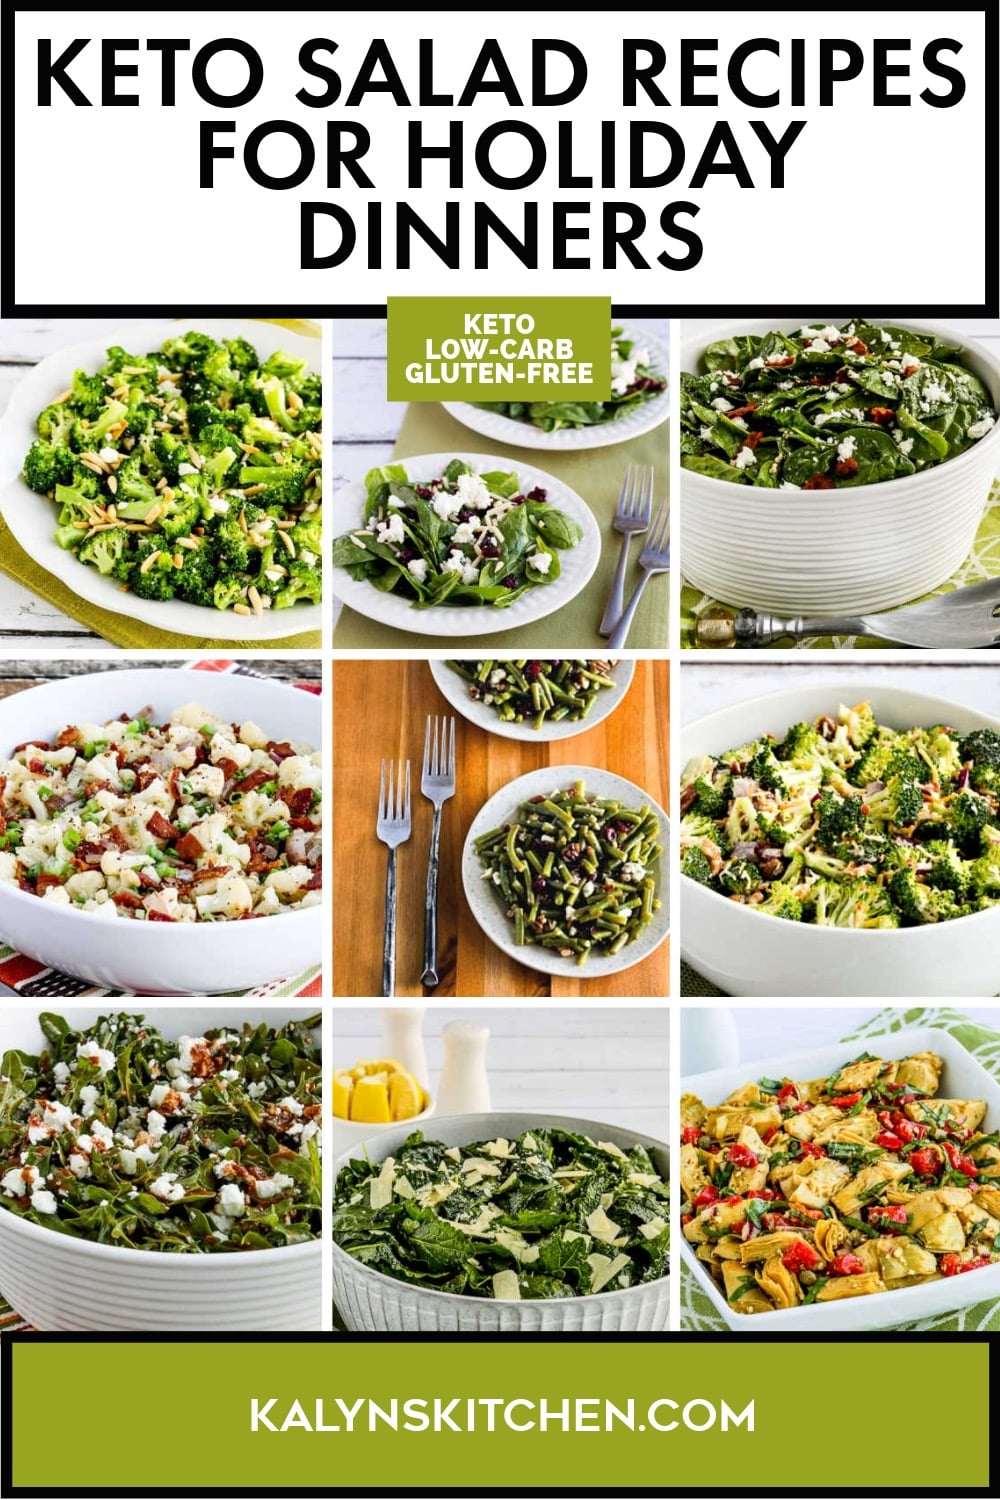 Pinterest image of Keto Salad Recipes for Holiday Dinners